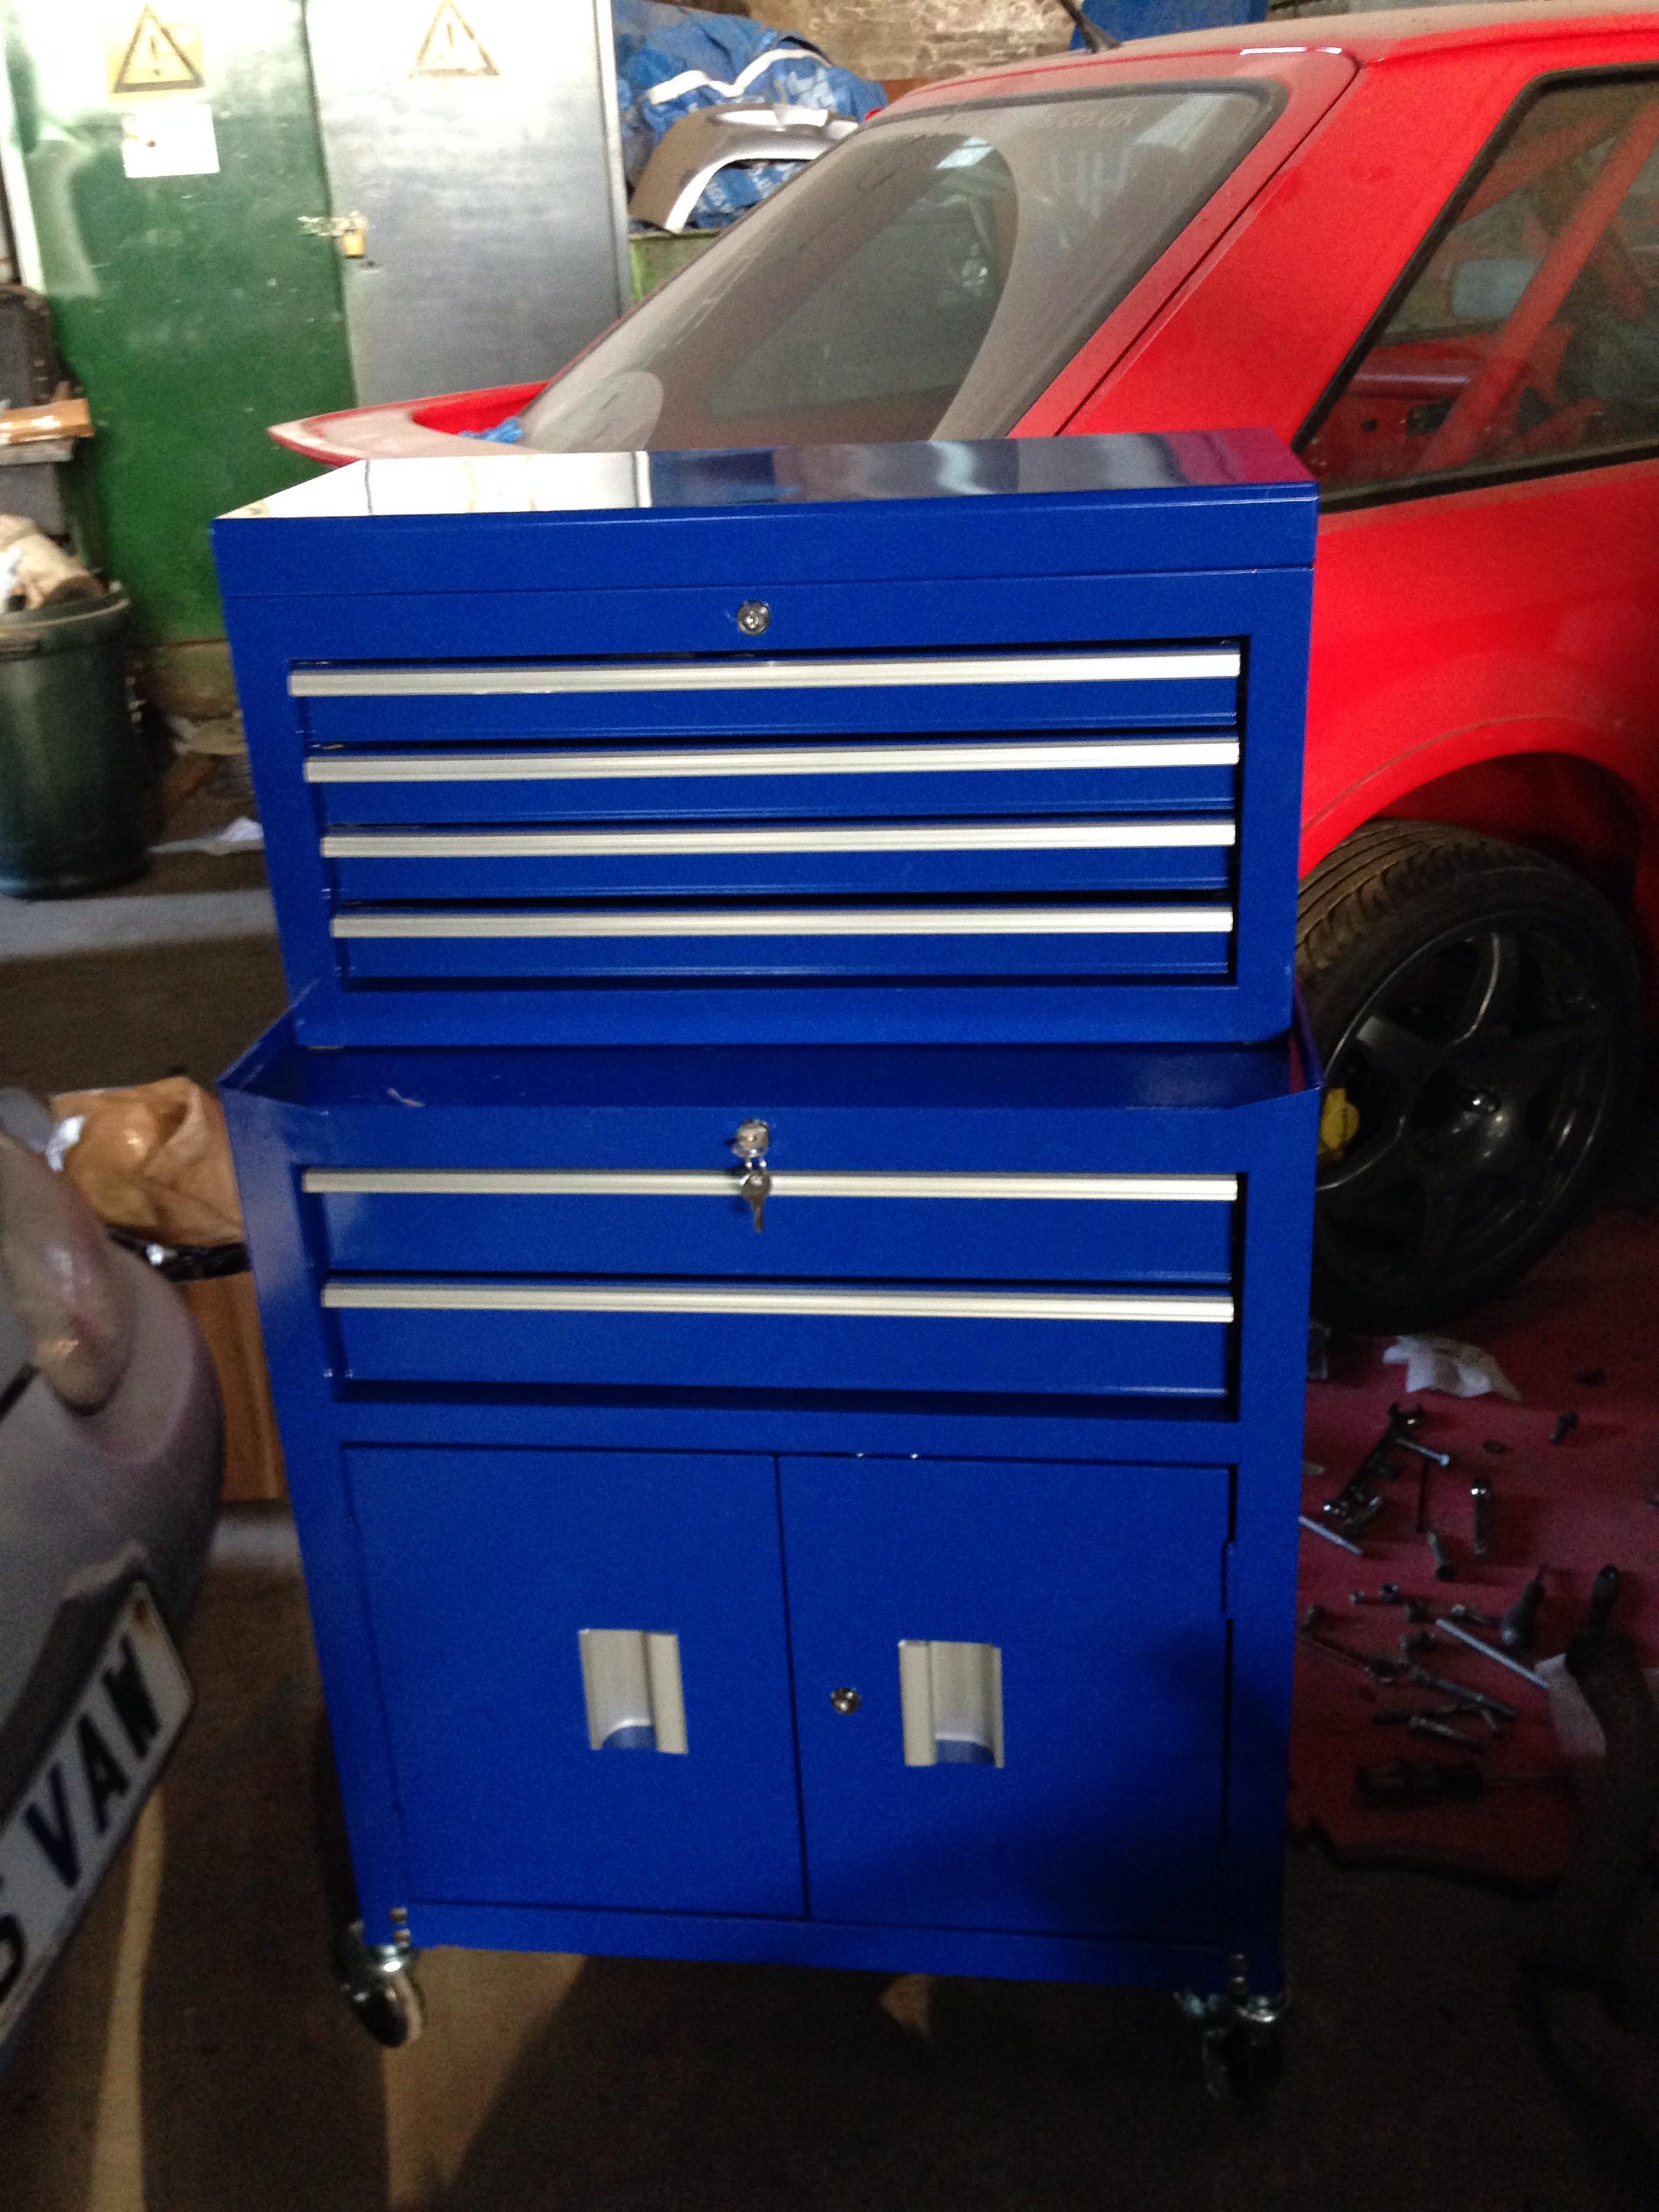 Cheap tool box this weekend at Halfords! - PassionFord - Ford